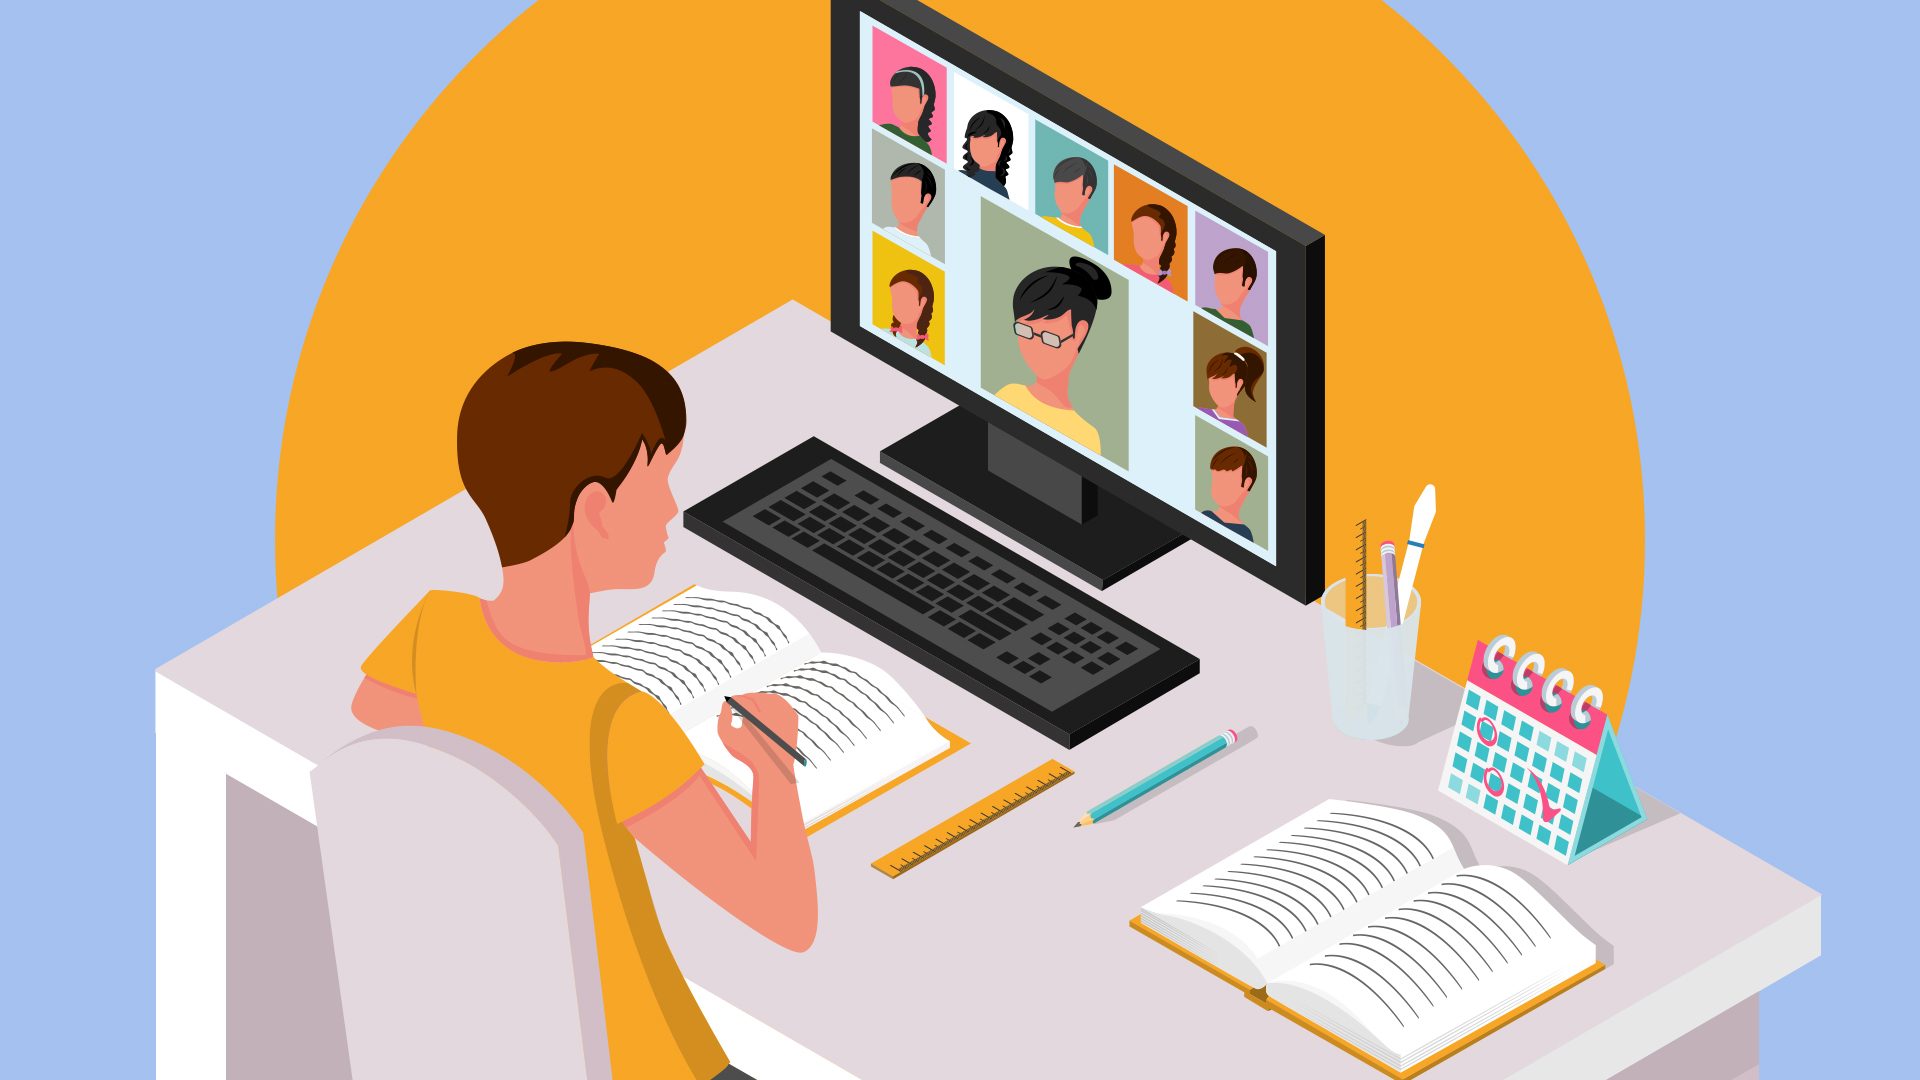 3 case studies: How ready are Philippine schools for distance learning?